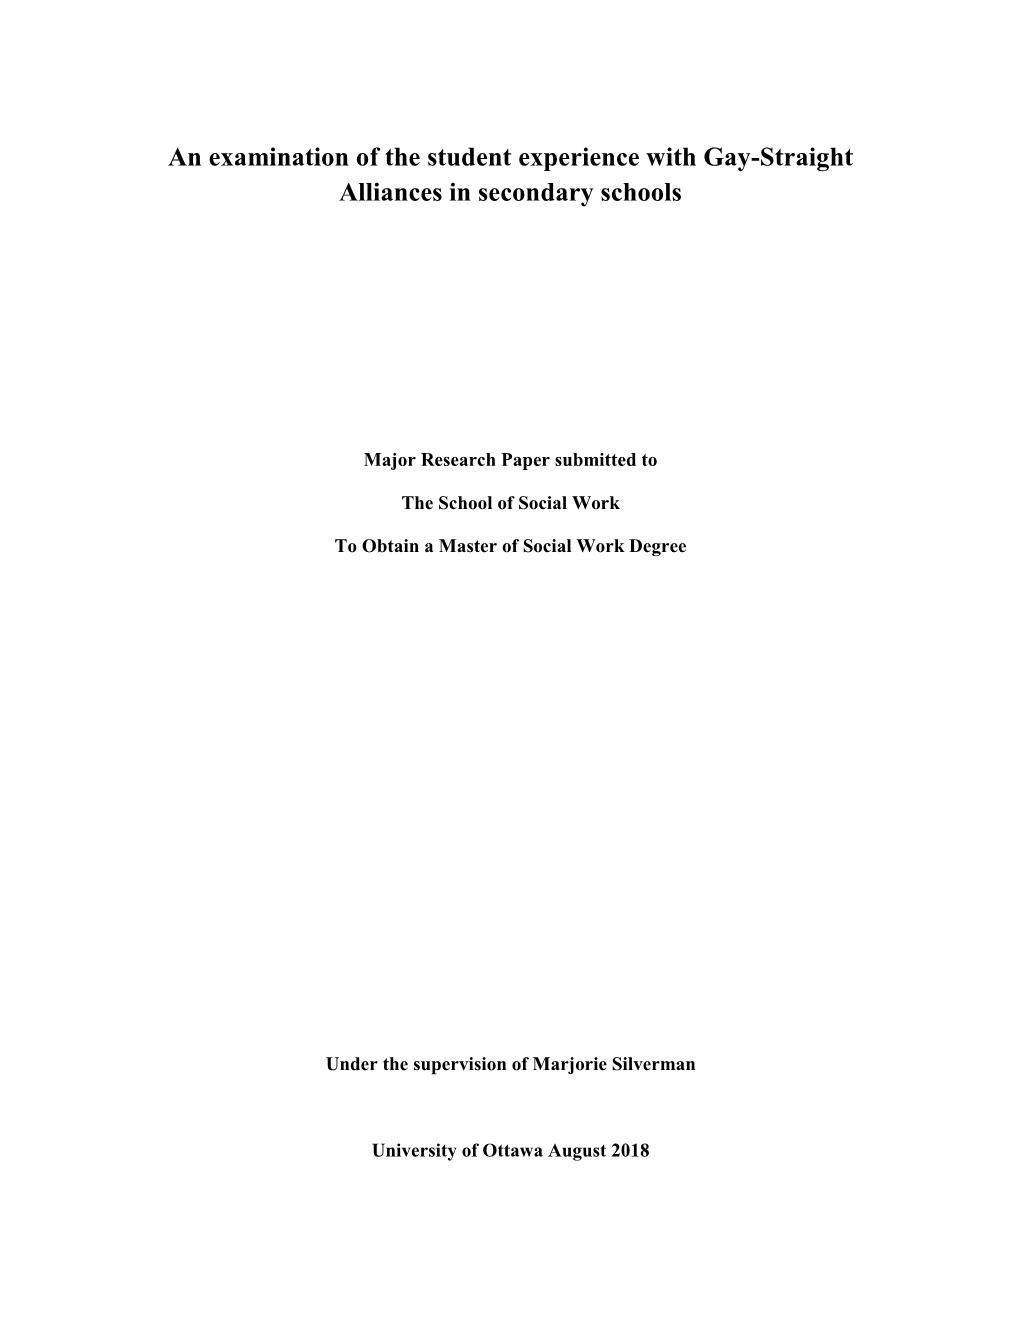 An Examination of the Student Experience with Gay-Straight Alliances in Secondary Schools